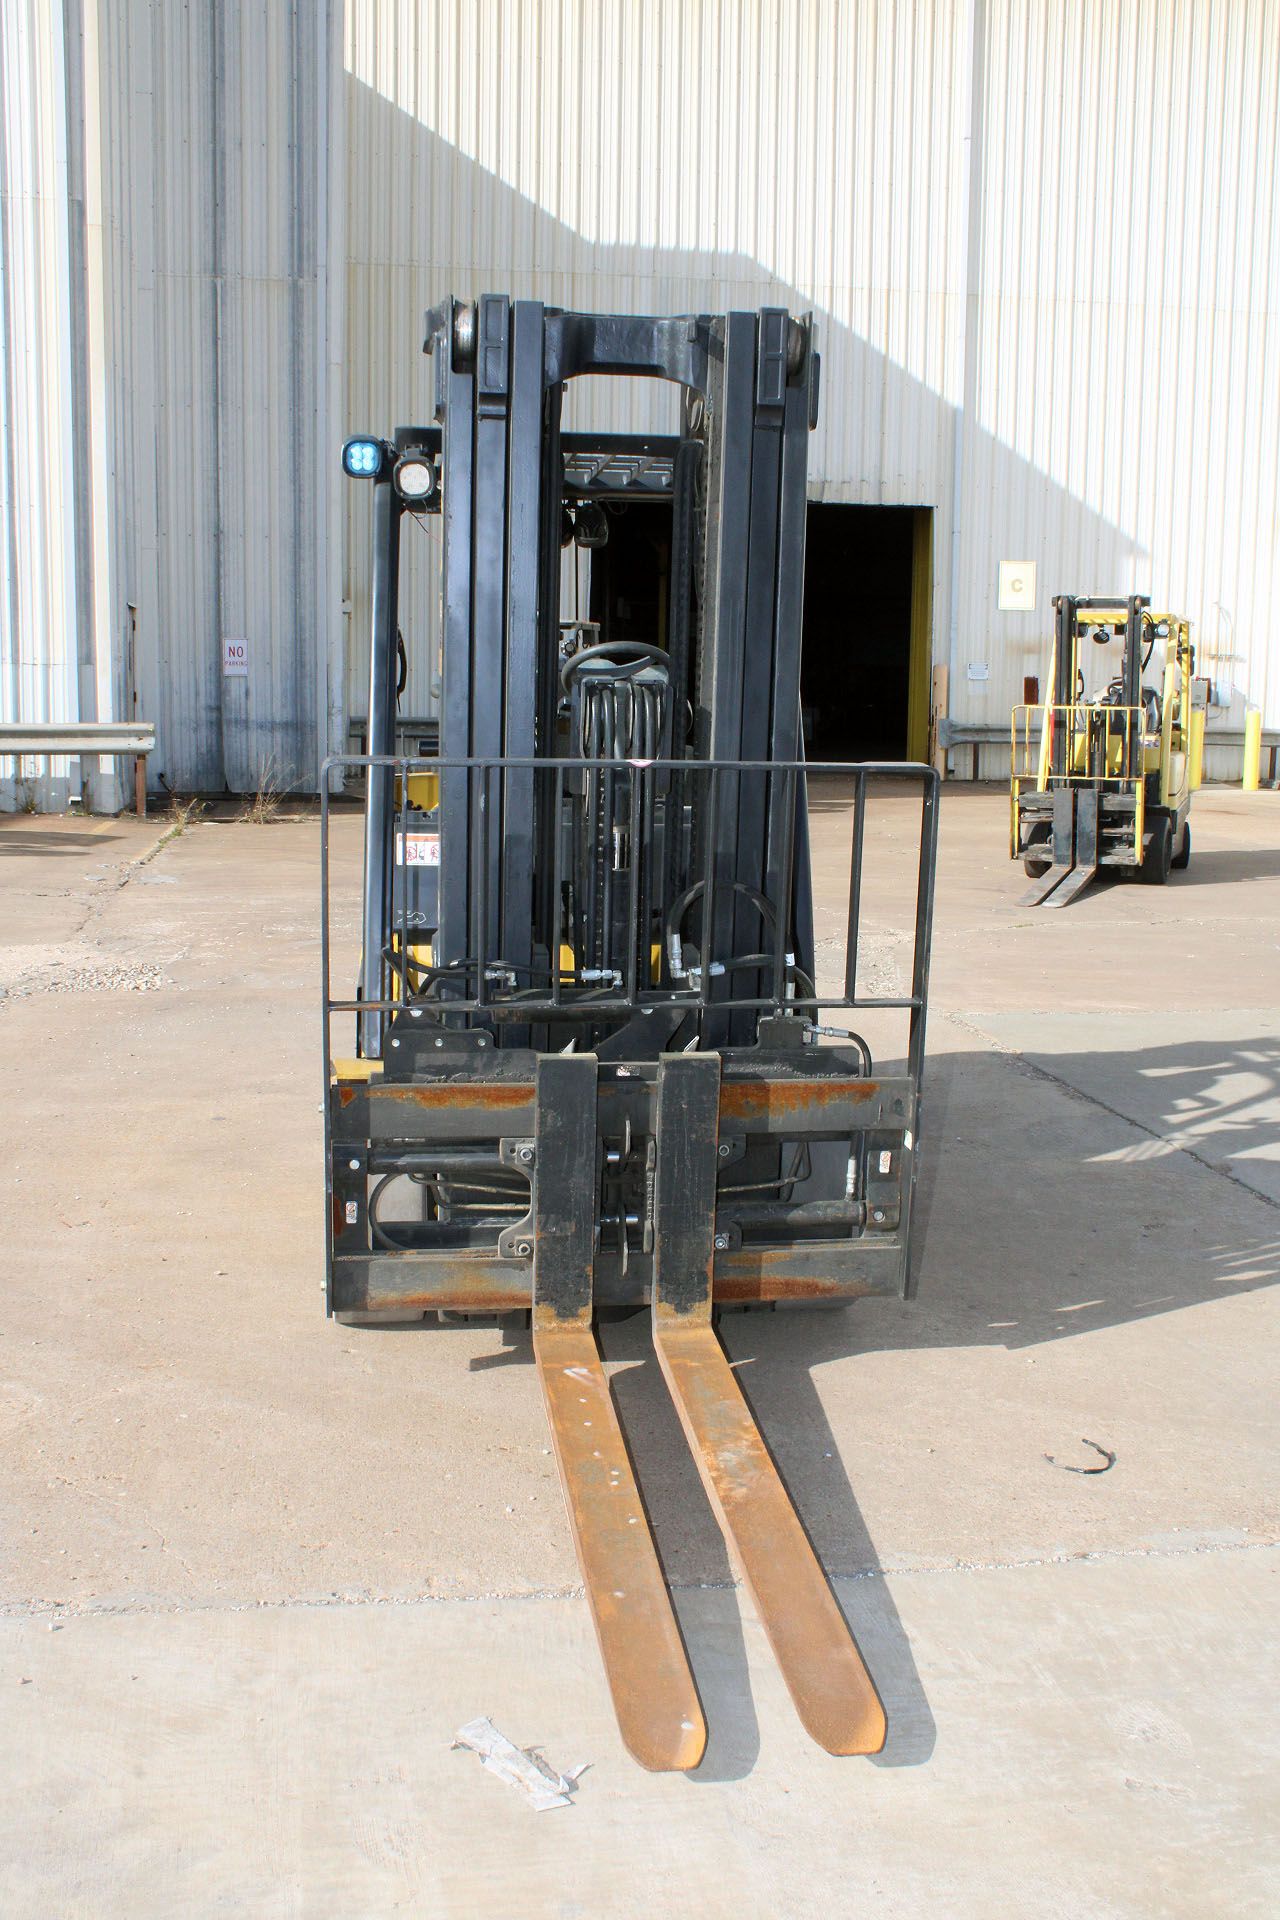 FORKLIFT, YALE 8,000 LB. BASE CAP. MDL. GLC080, new 2016, LPG, 200" max. lift ht., 94" 3-stage mast, - Image 3 of 11